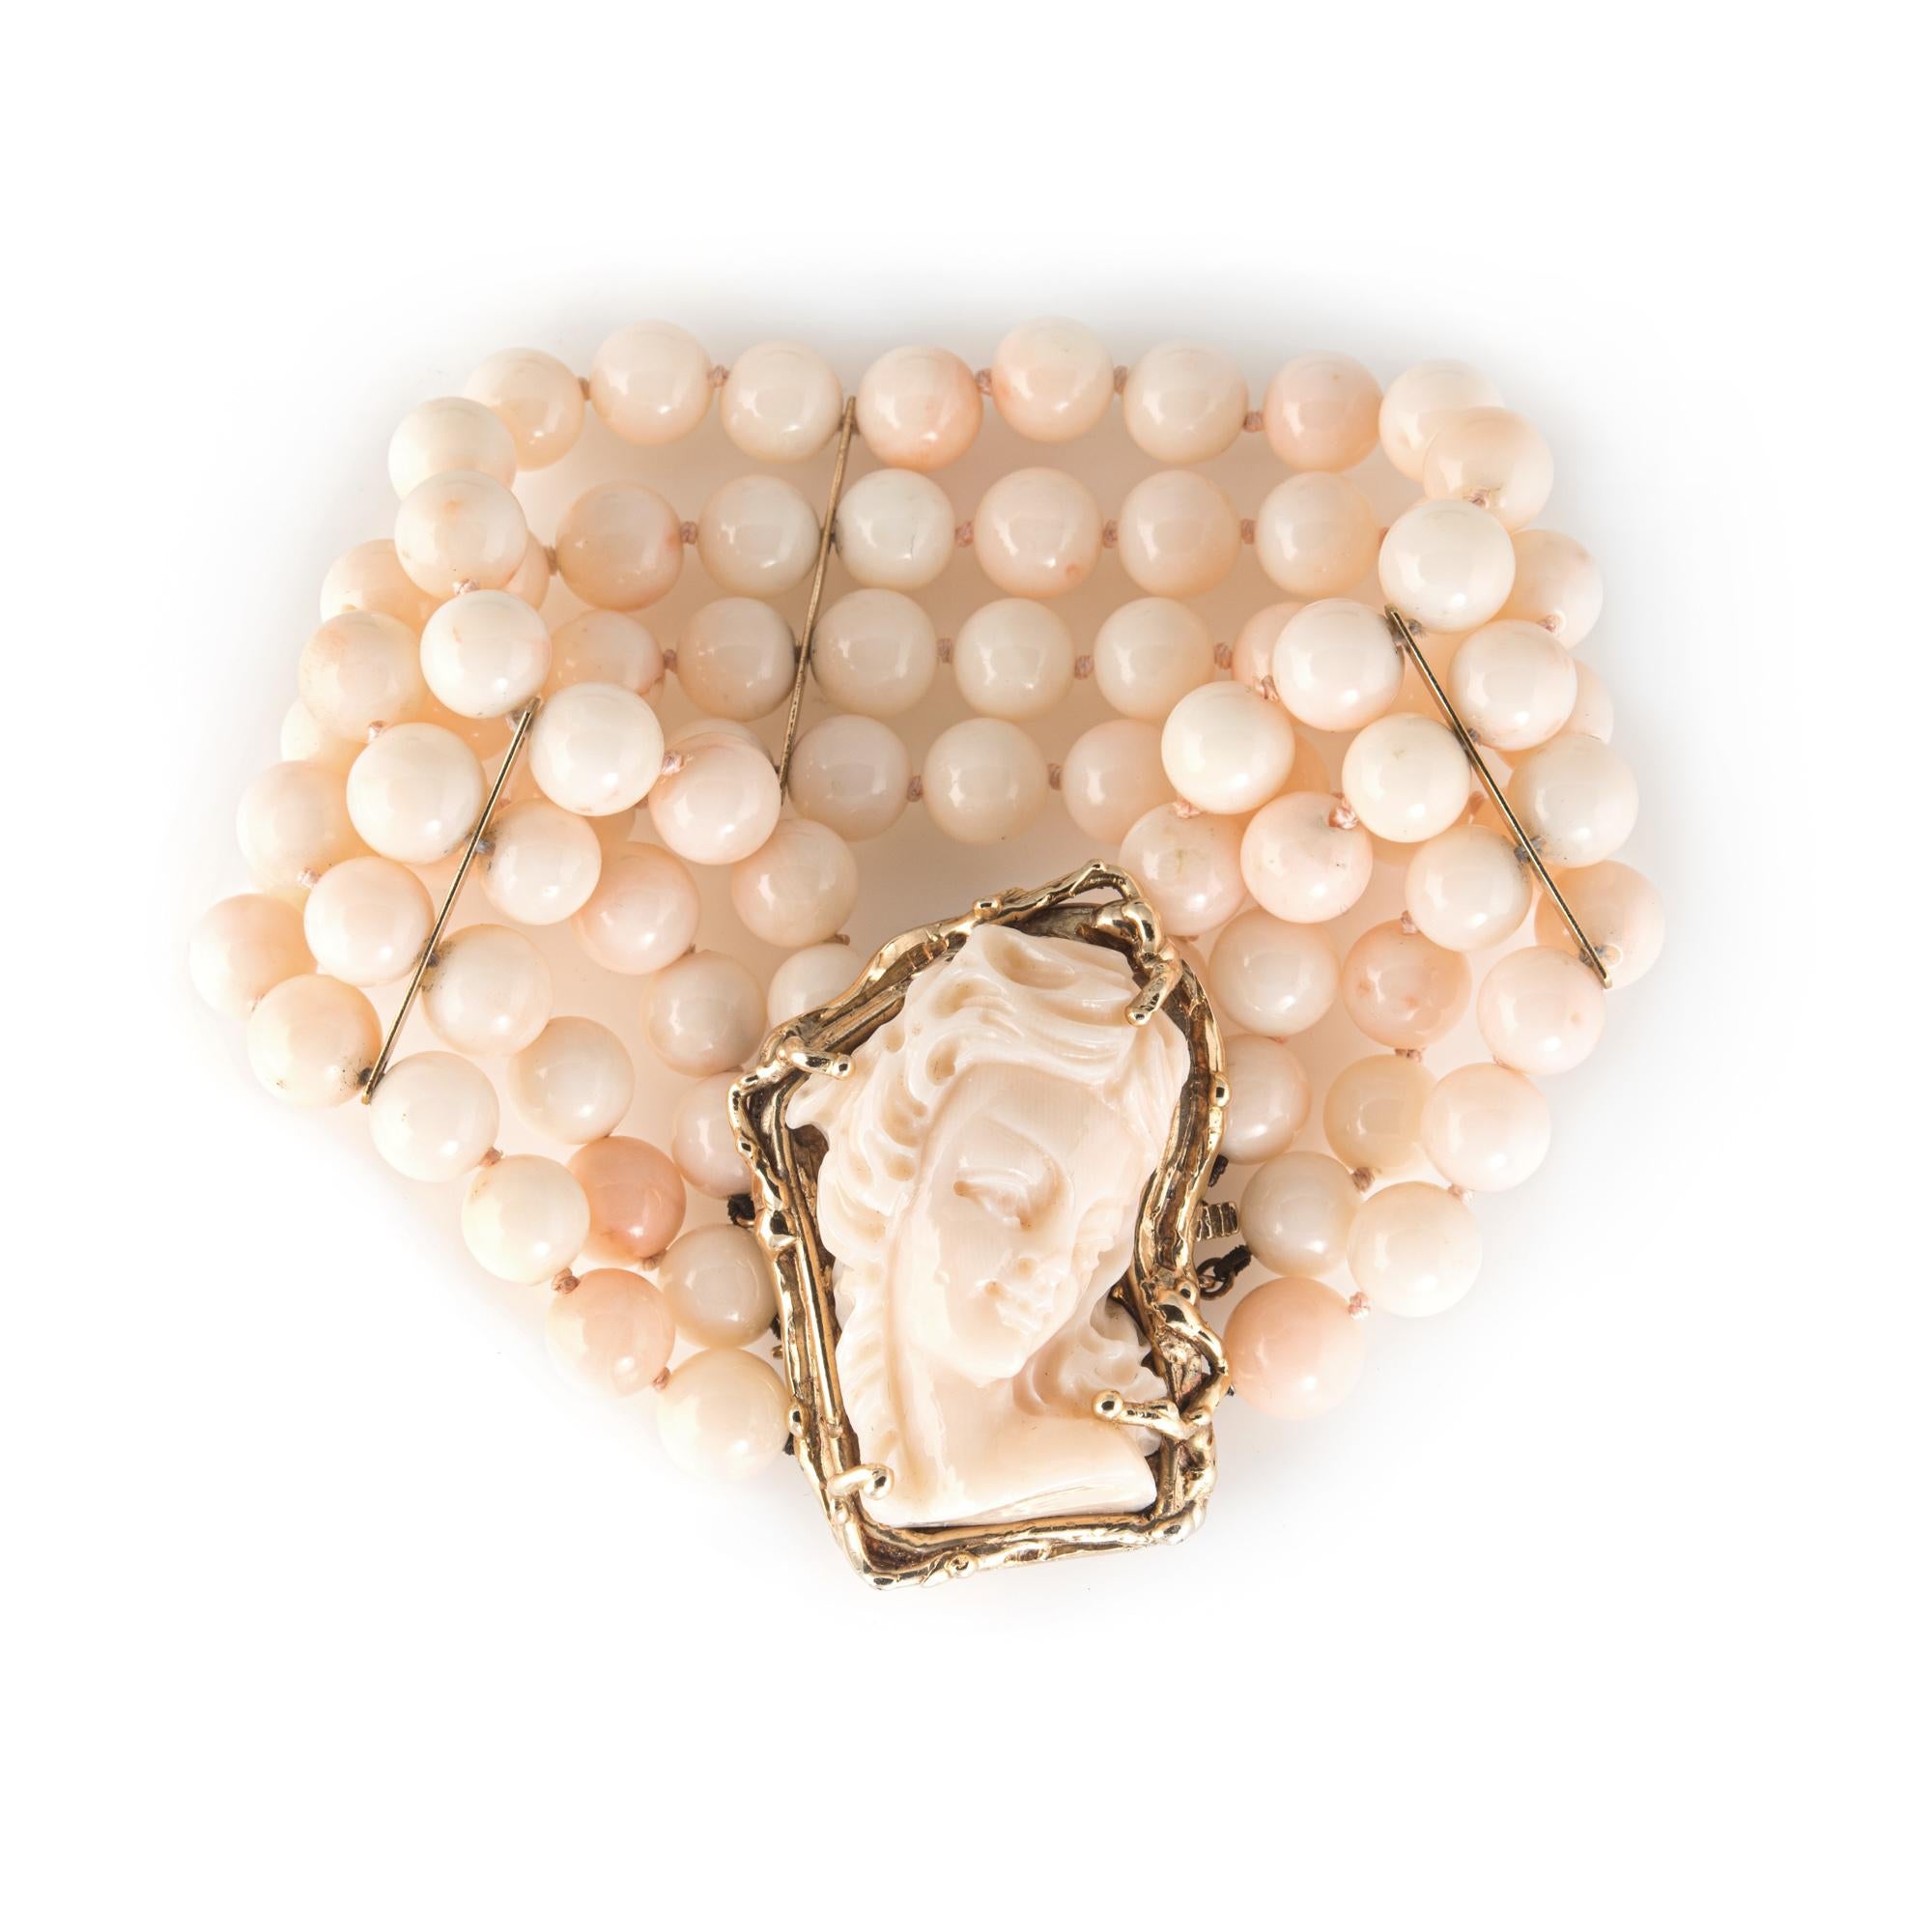 Finely detailed vintage angel skin coral bracelet (circa 1950s to 1960s), crafted in 14 karat yellow gold. 

The bracelet features a large piece of coral measuring 35mm x 22mm set into the clasp and carved with the profile of a woman. The bracelet